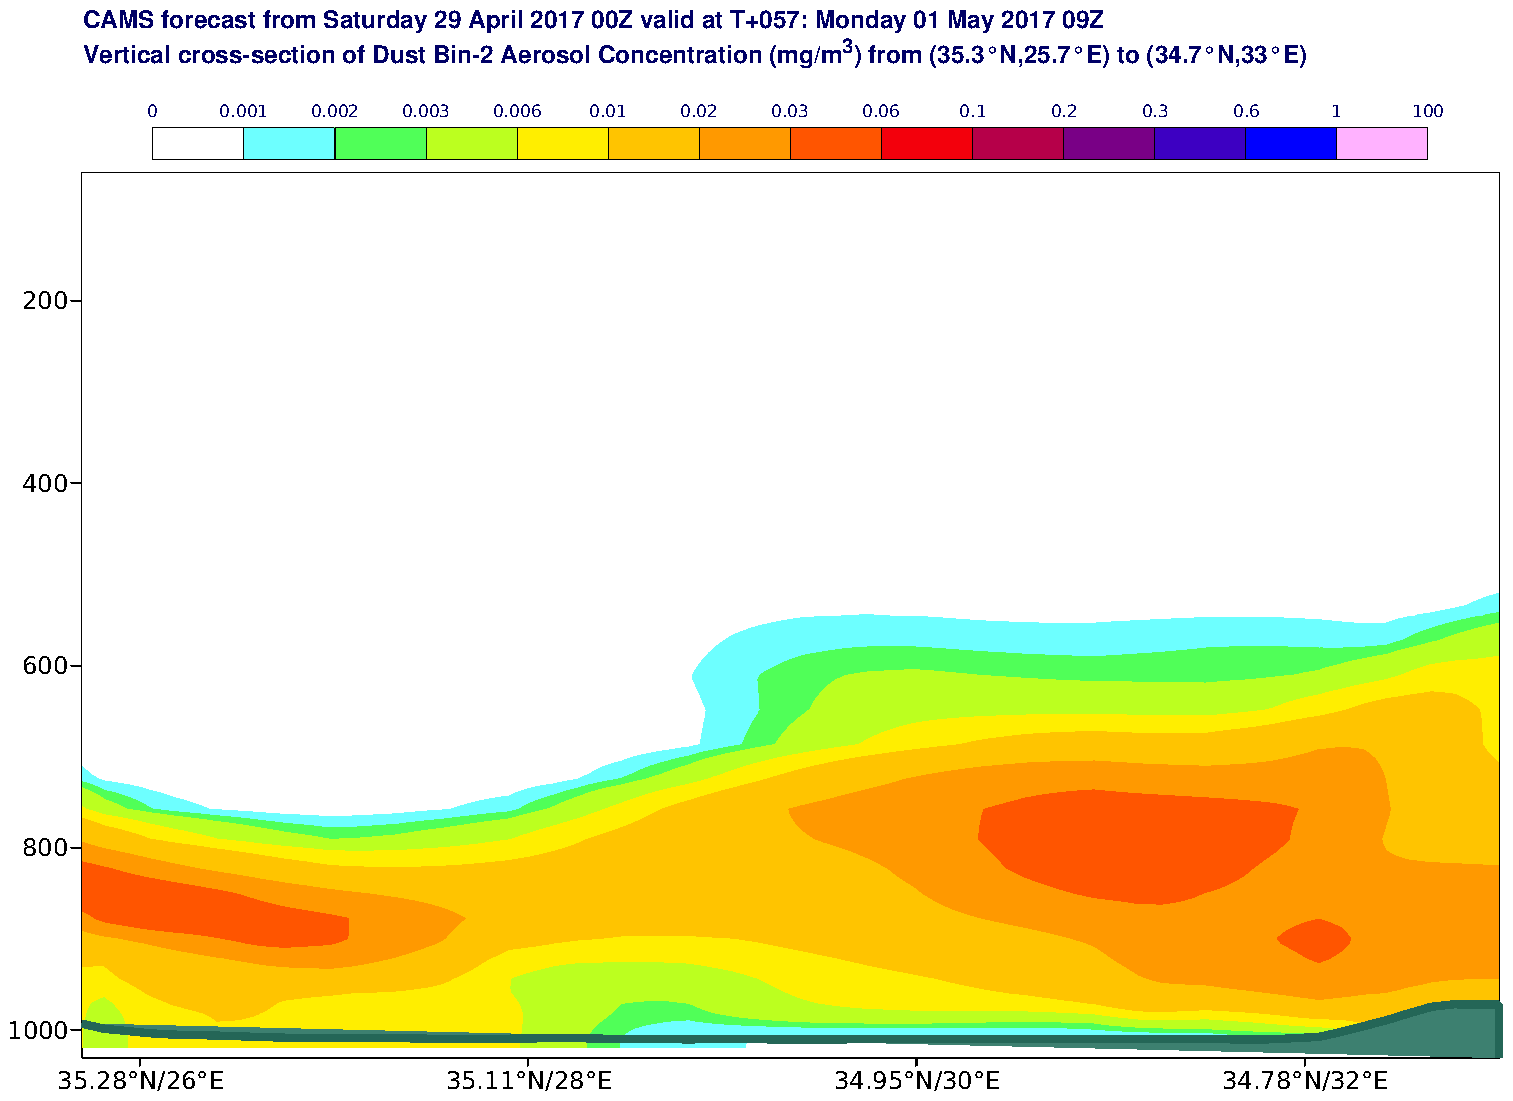 Vertical cross-section of Dust Bin-2 Aerosol Concentration (mg/m3) valid at T57 - 2017-05-01 09:00